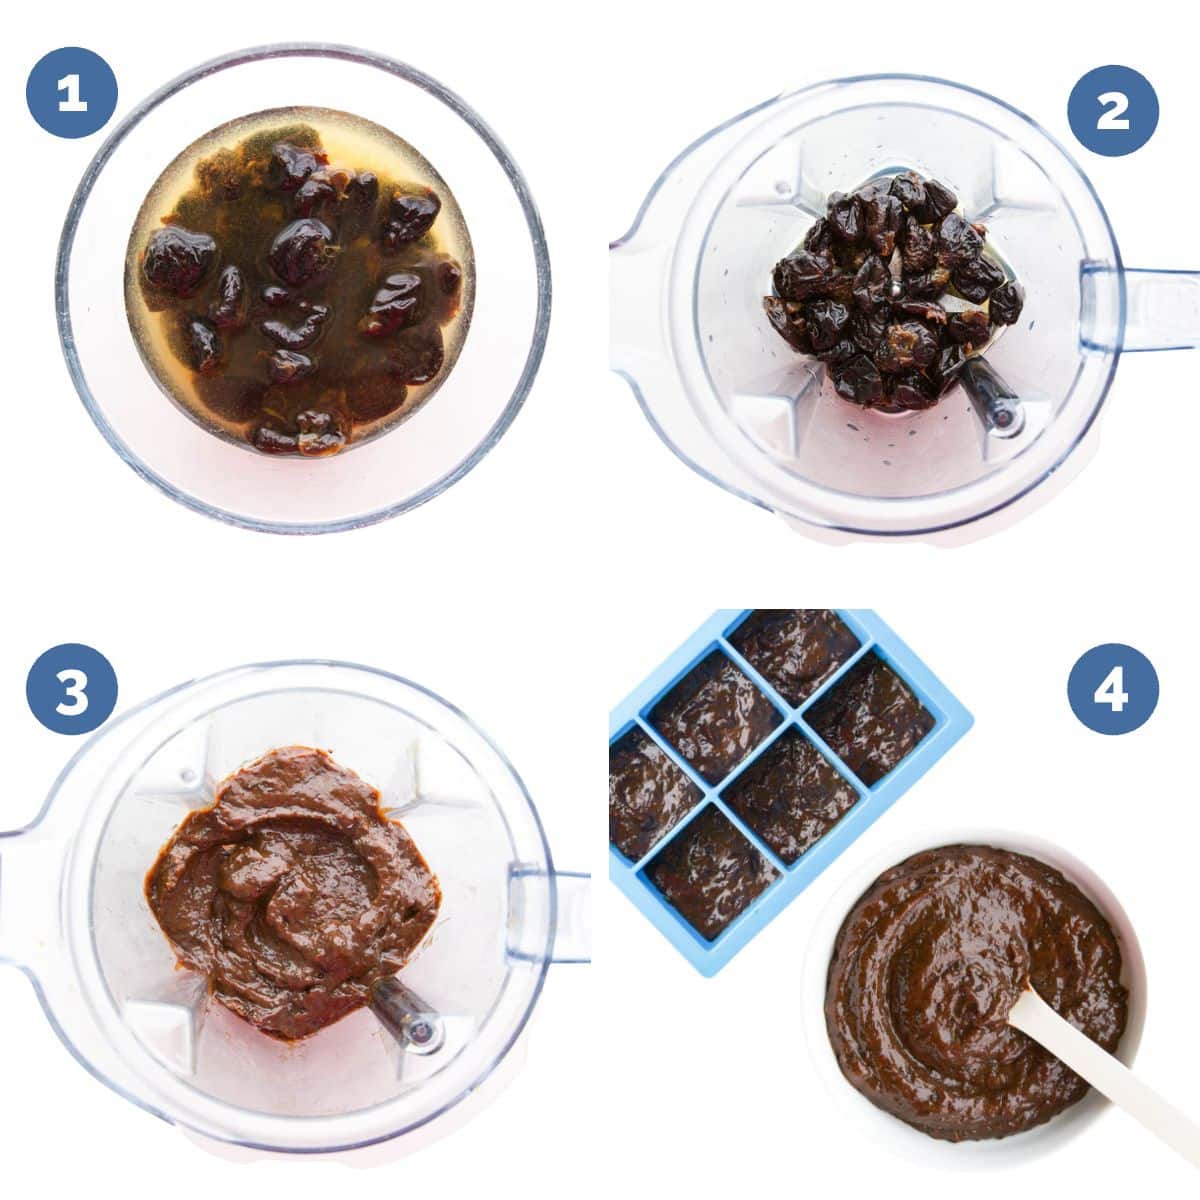 Collage of 4 Images Showing Process Shots to Make Prune Puree 1) Prunes Soaked in Bowl 2) Prunes in Blender Before Blending 3) Blended Prunes 4) Prune Puree in Bowl and Ice Cube Tray.